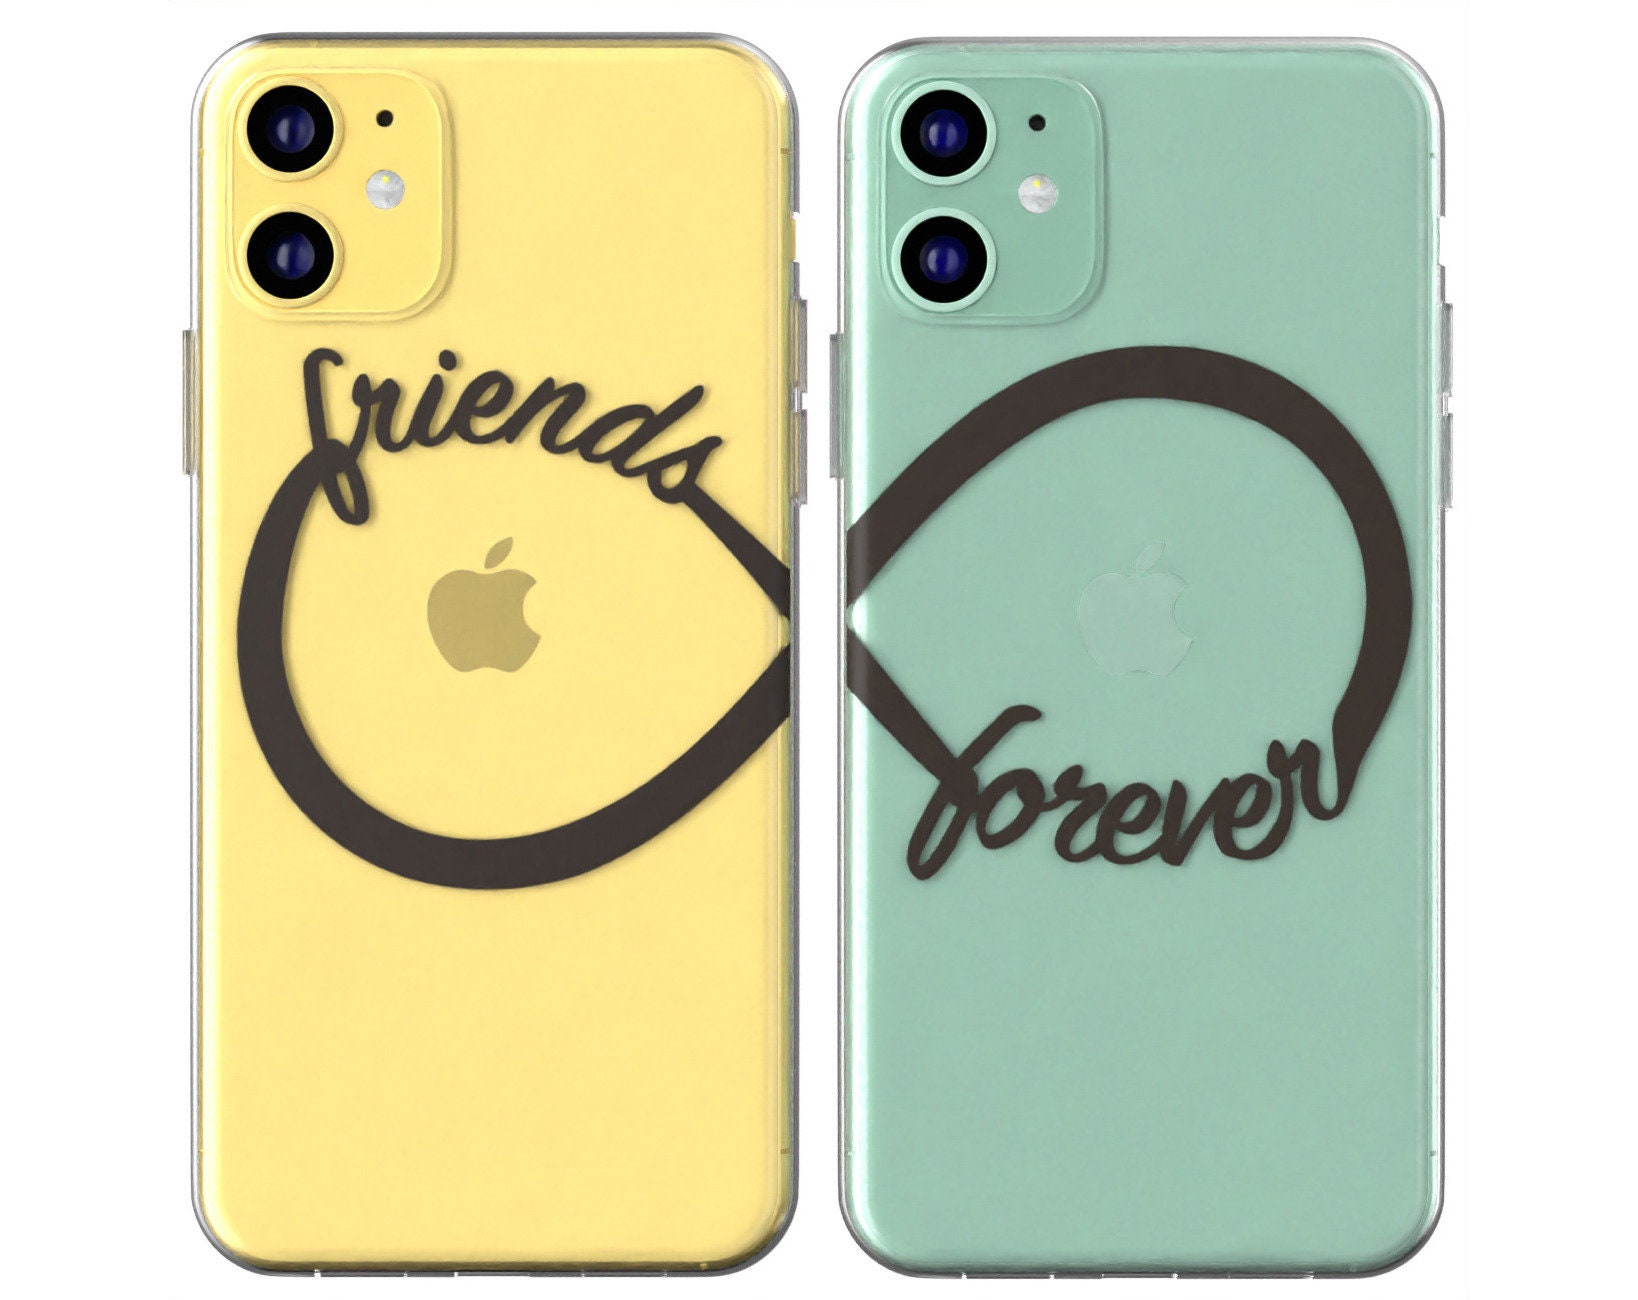 Coque Meilleure Amie You're My Person iPhone